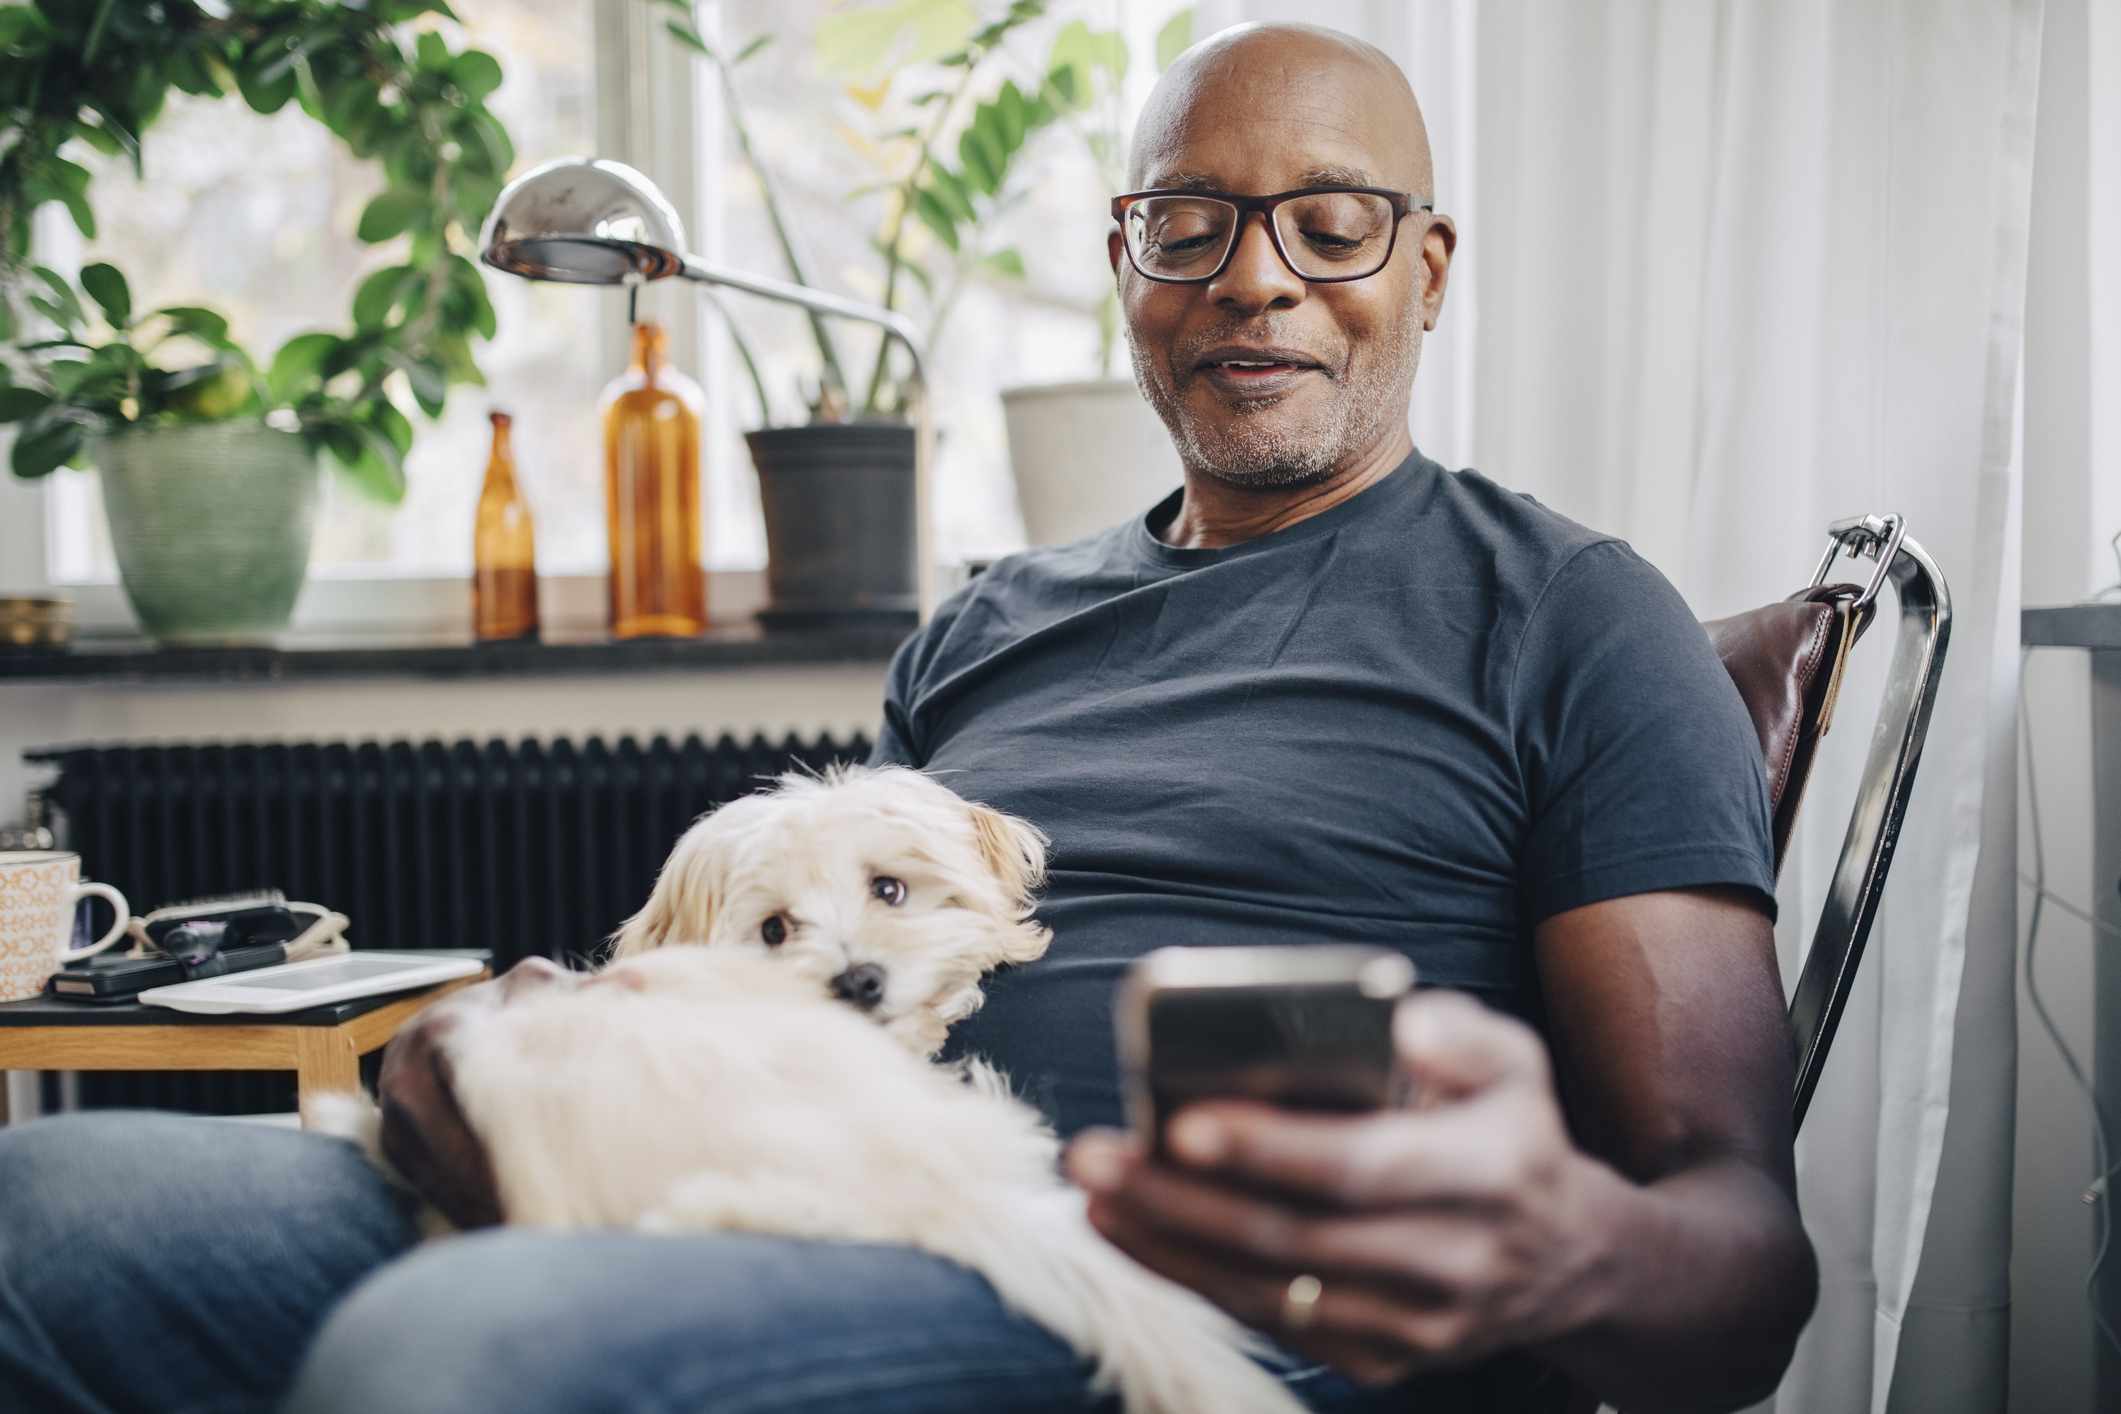 Smiling retired senior male using smartphone while sitting with dog in room at home